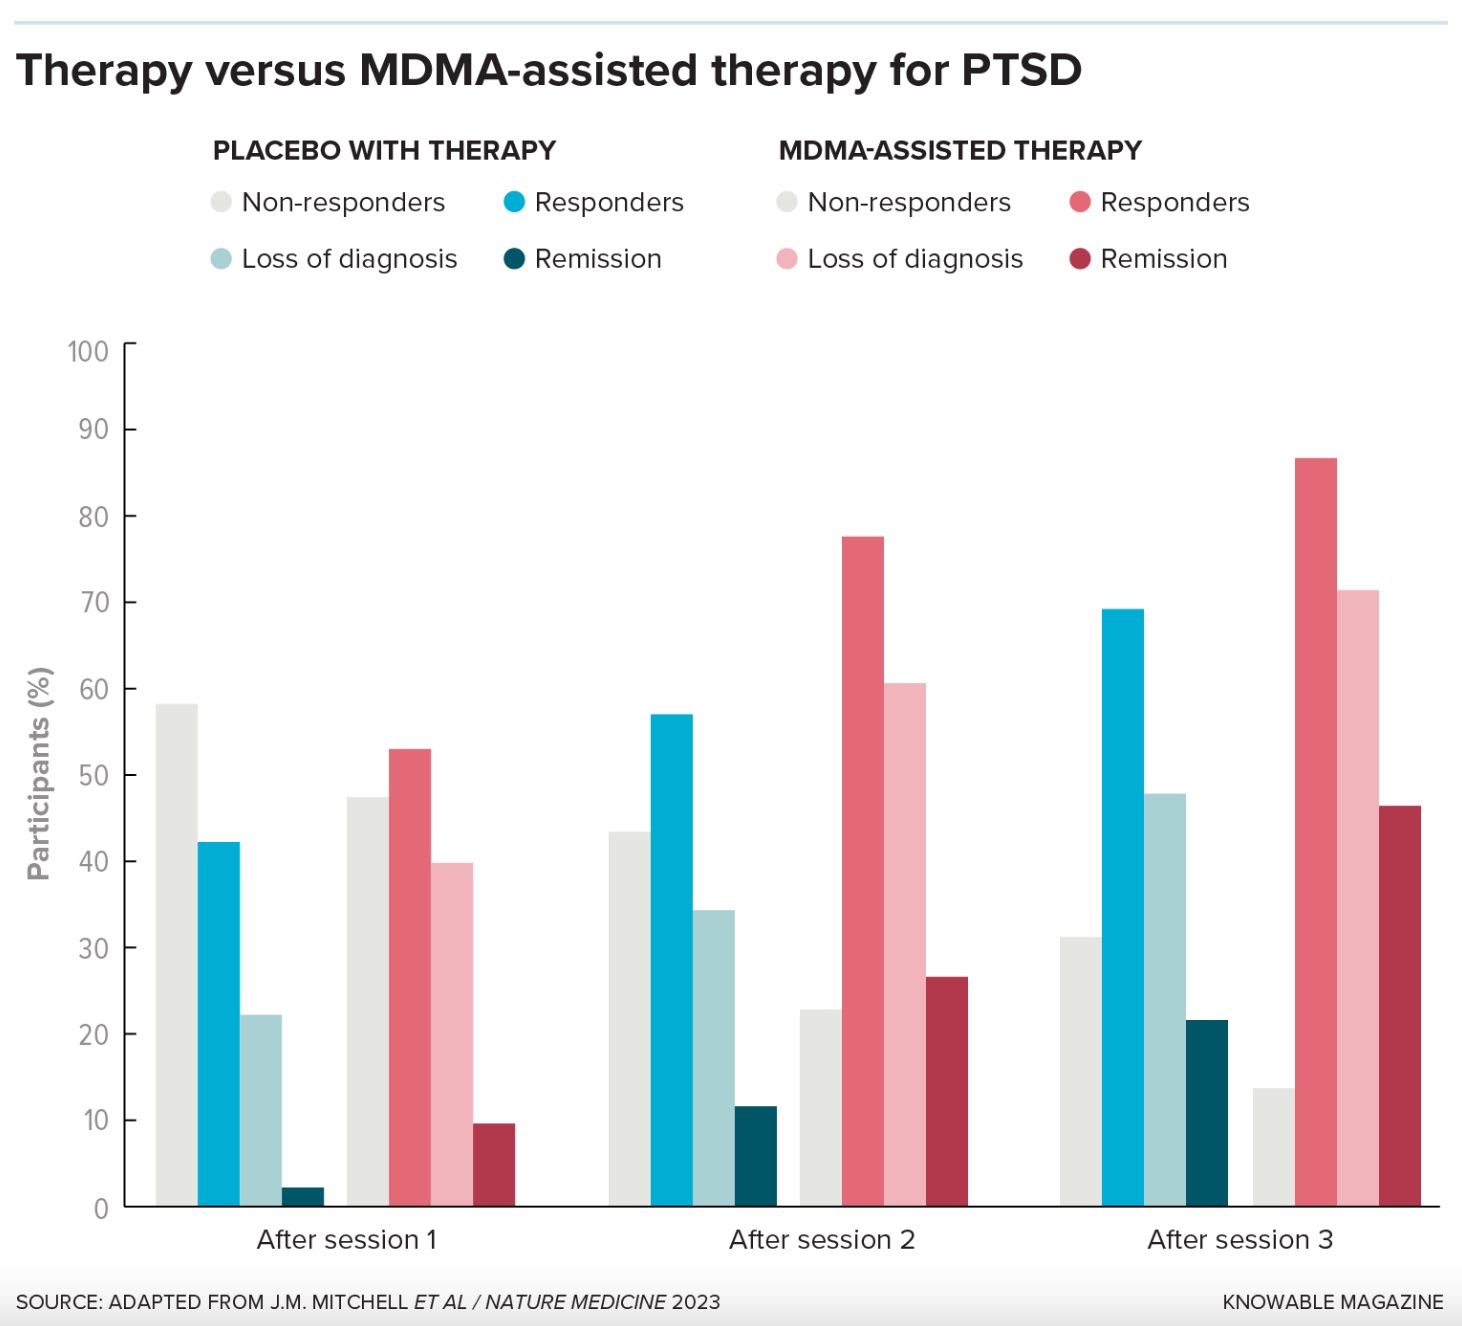 Bar chart comparing the effectiveness of ptsd treatment with placebo versus mdma-assisted therapy over three sessions, indicating higher remission rates and loss of diagnosis in the mdma-assisted group.